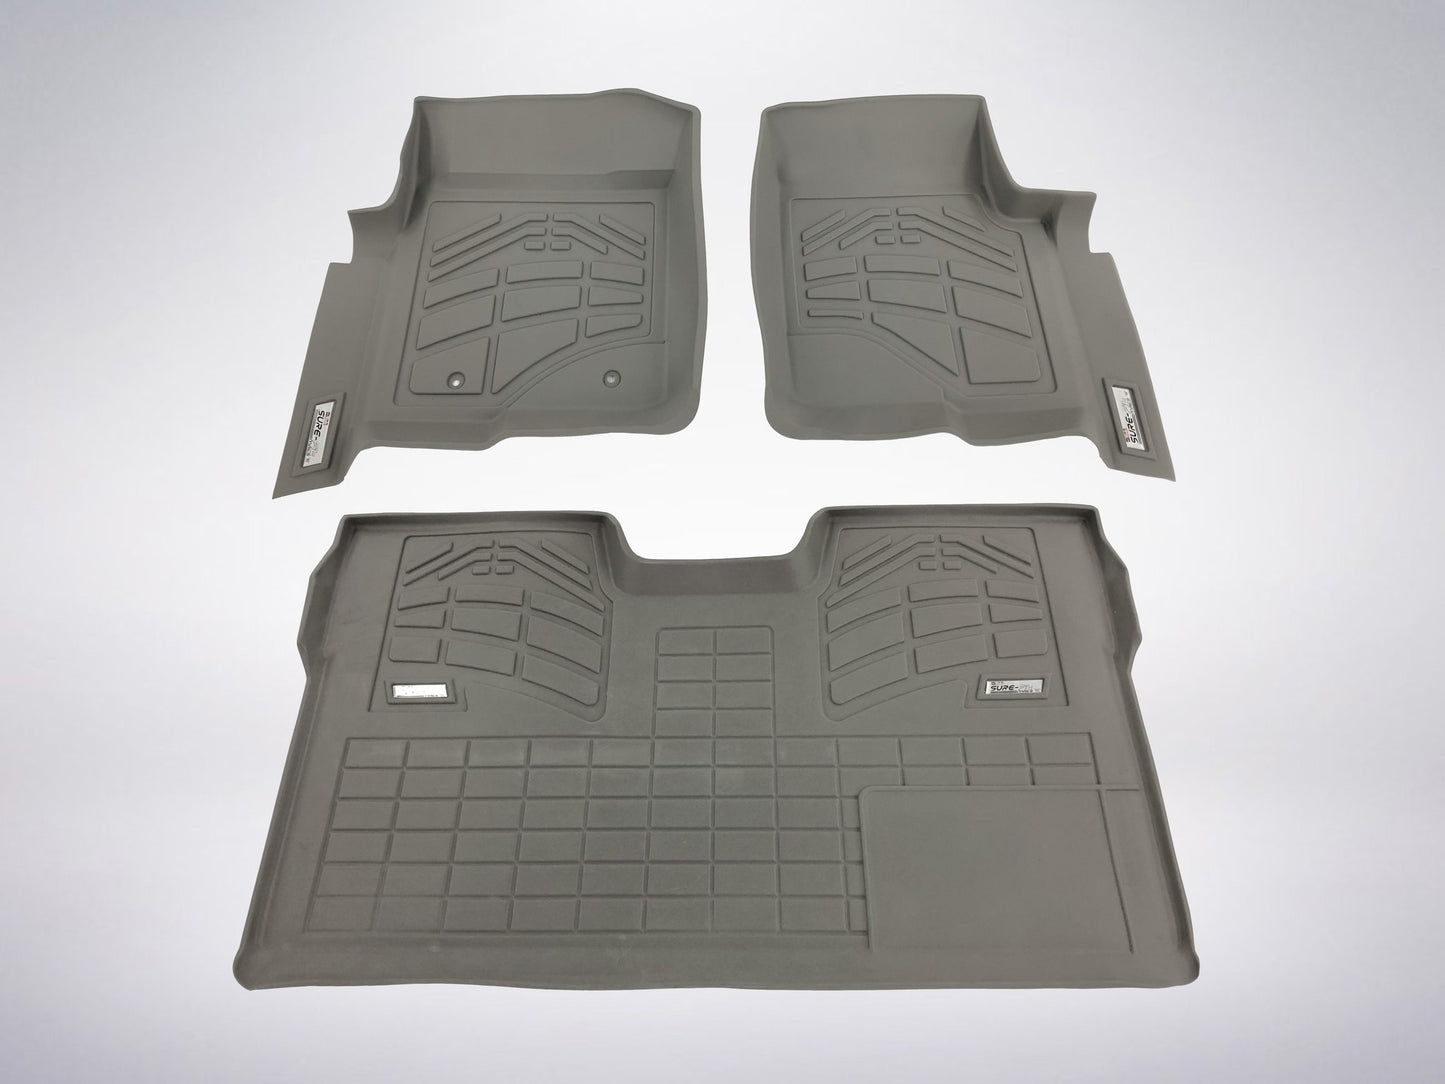 2013 Ford F-150 Floor Mats | Combo Pack